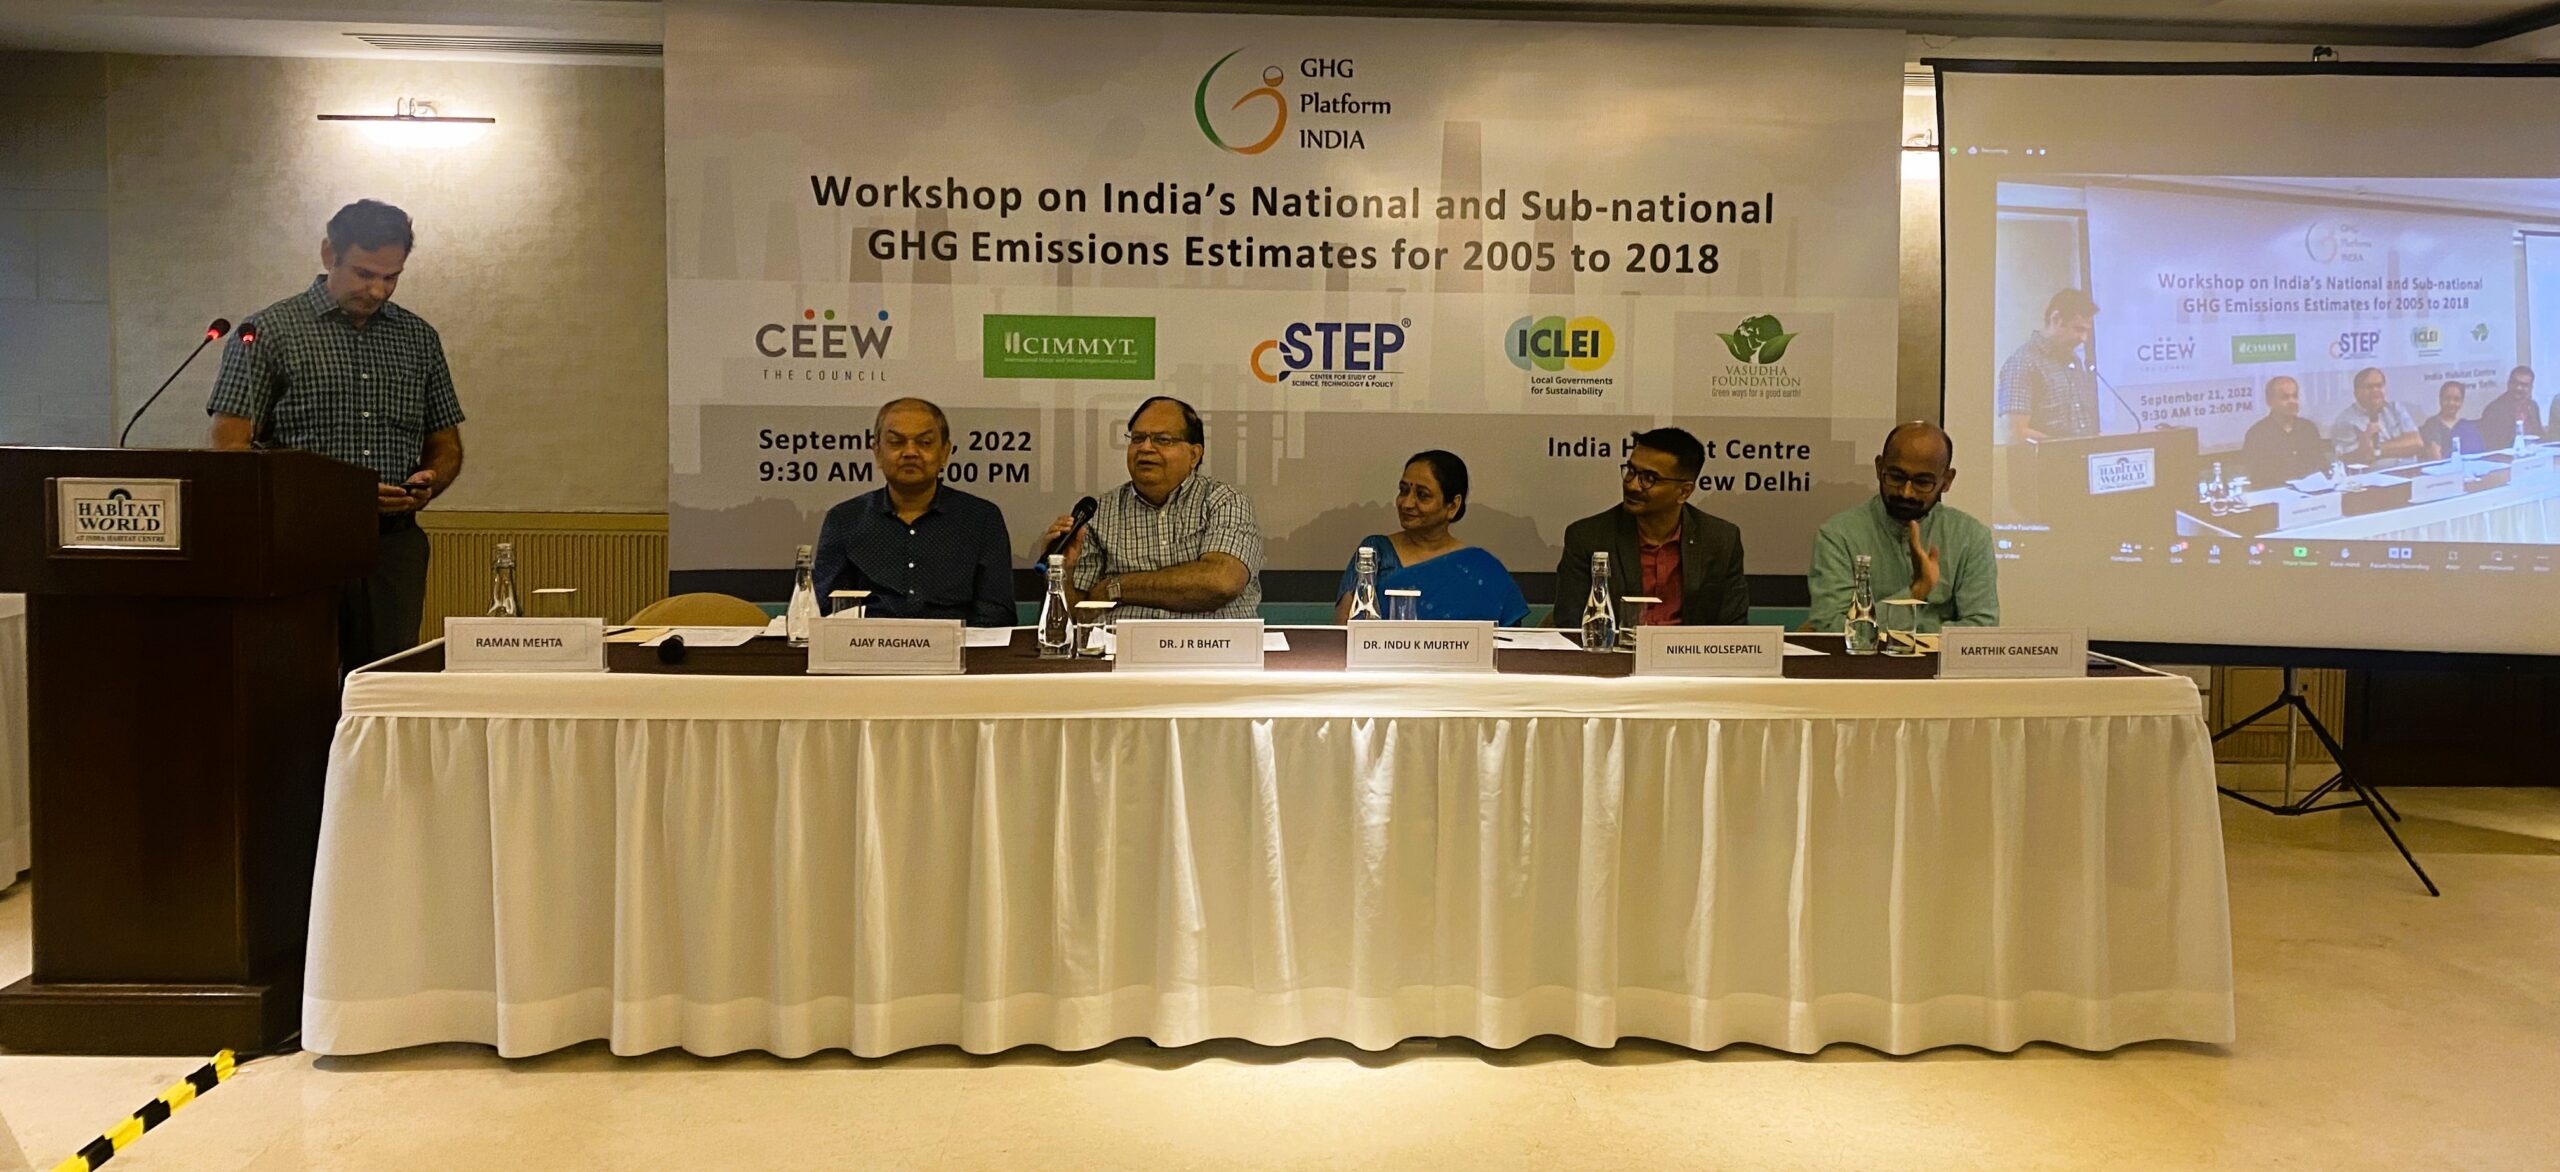 Workshop on India’s National and Sub-national GHG Emissions Estimates for 2005 to 2018